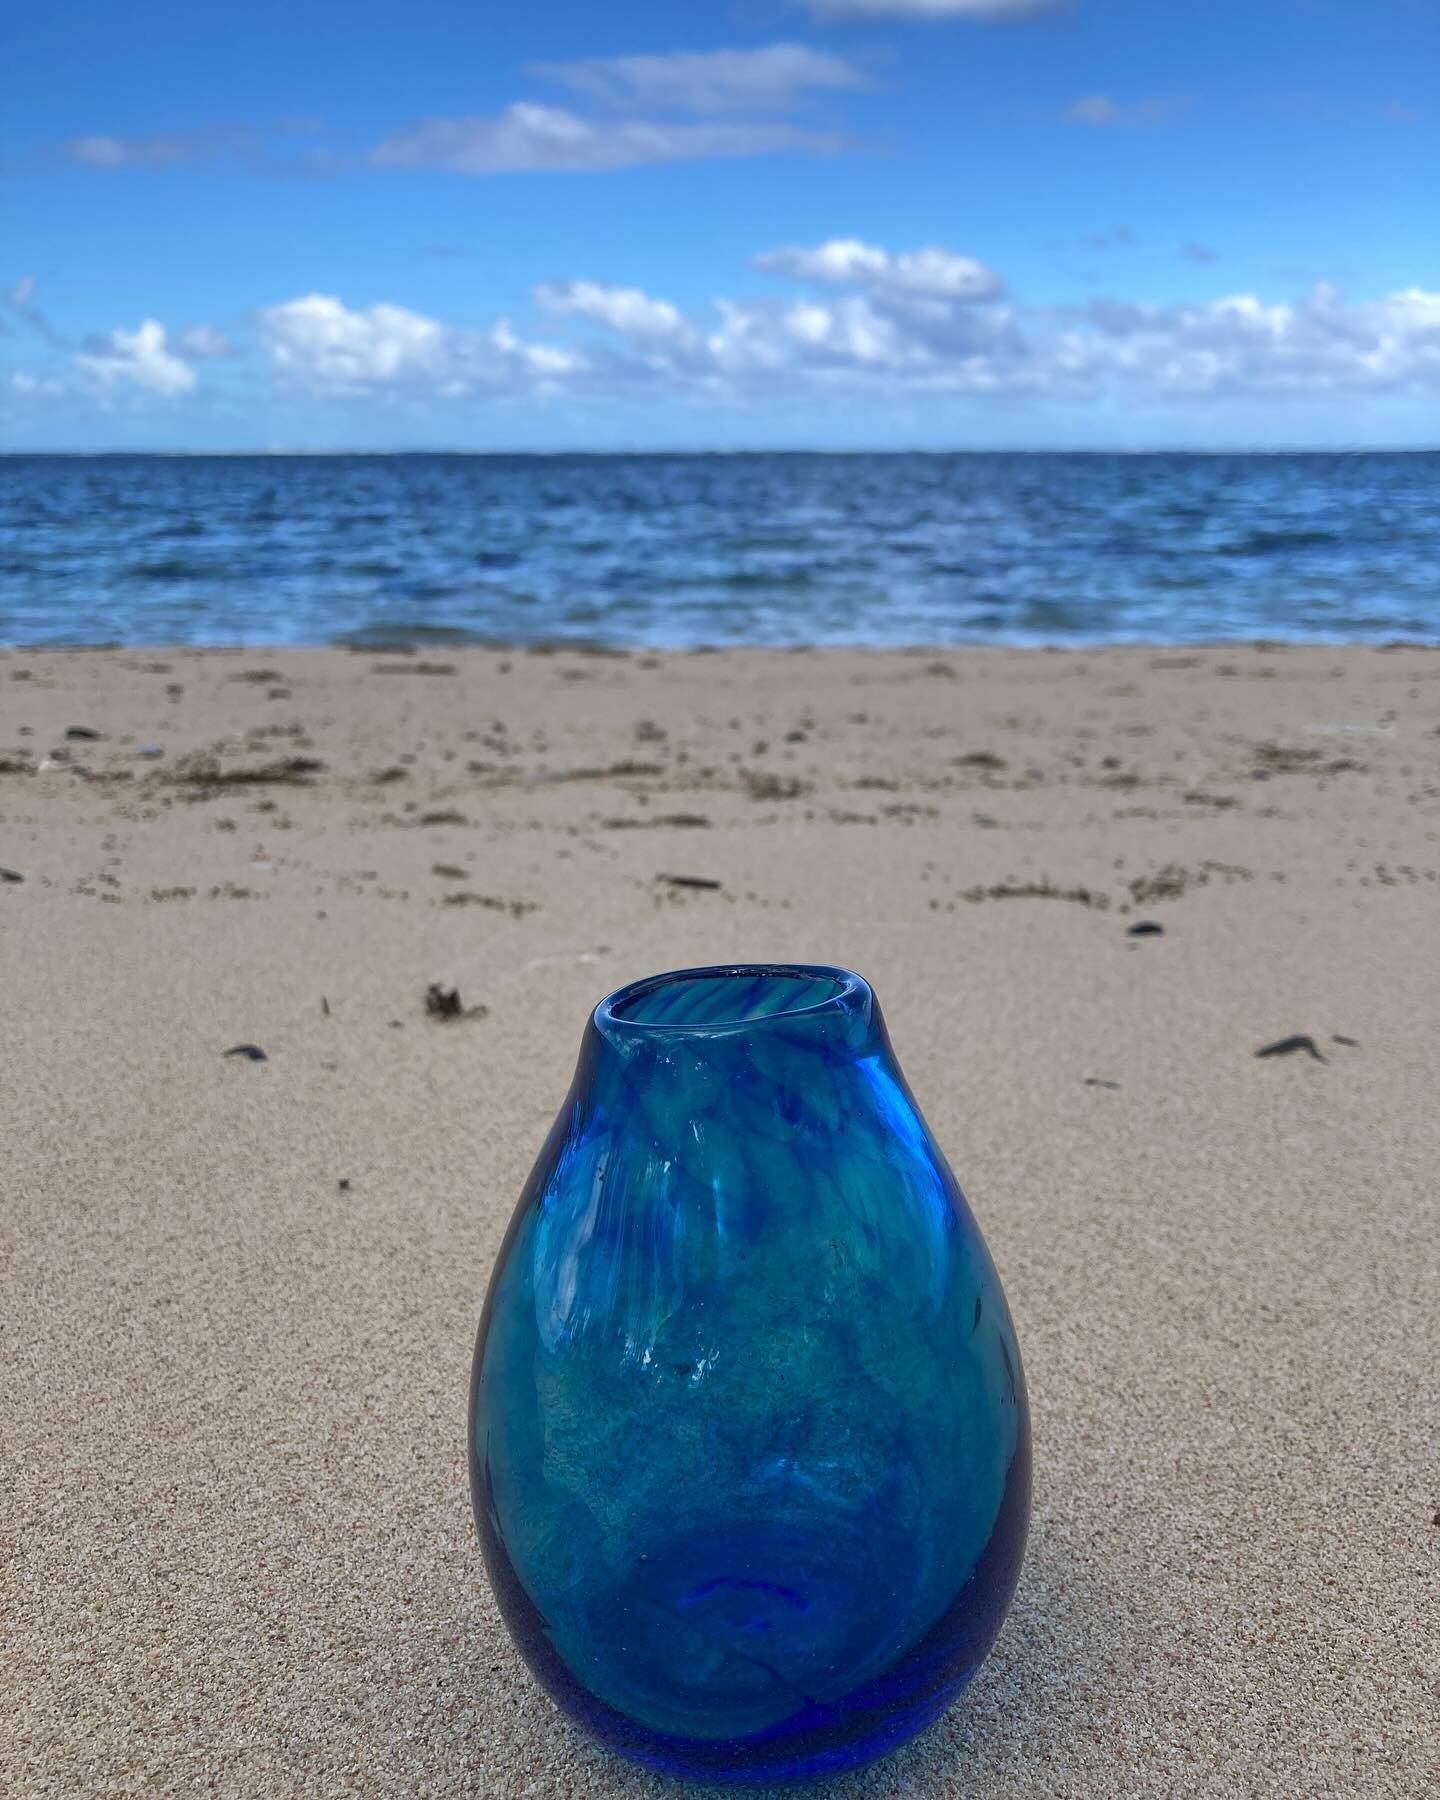 In Fijian Love Song, Ryan sets out to show Callie the best of the country and while researching things to do in Fiji, I came across @hotglassfiji. I&rsquo;m a big fan of hand blown glass and have been in a glass blowing studio in Gibraltar. So when I